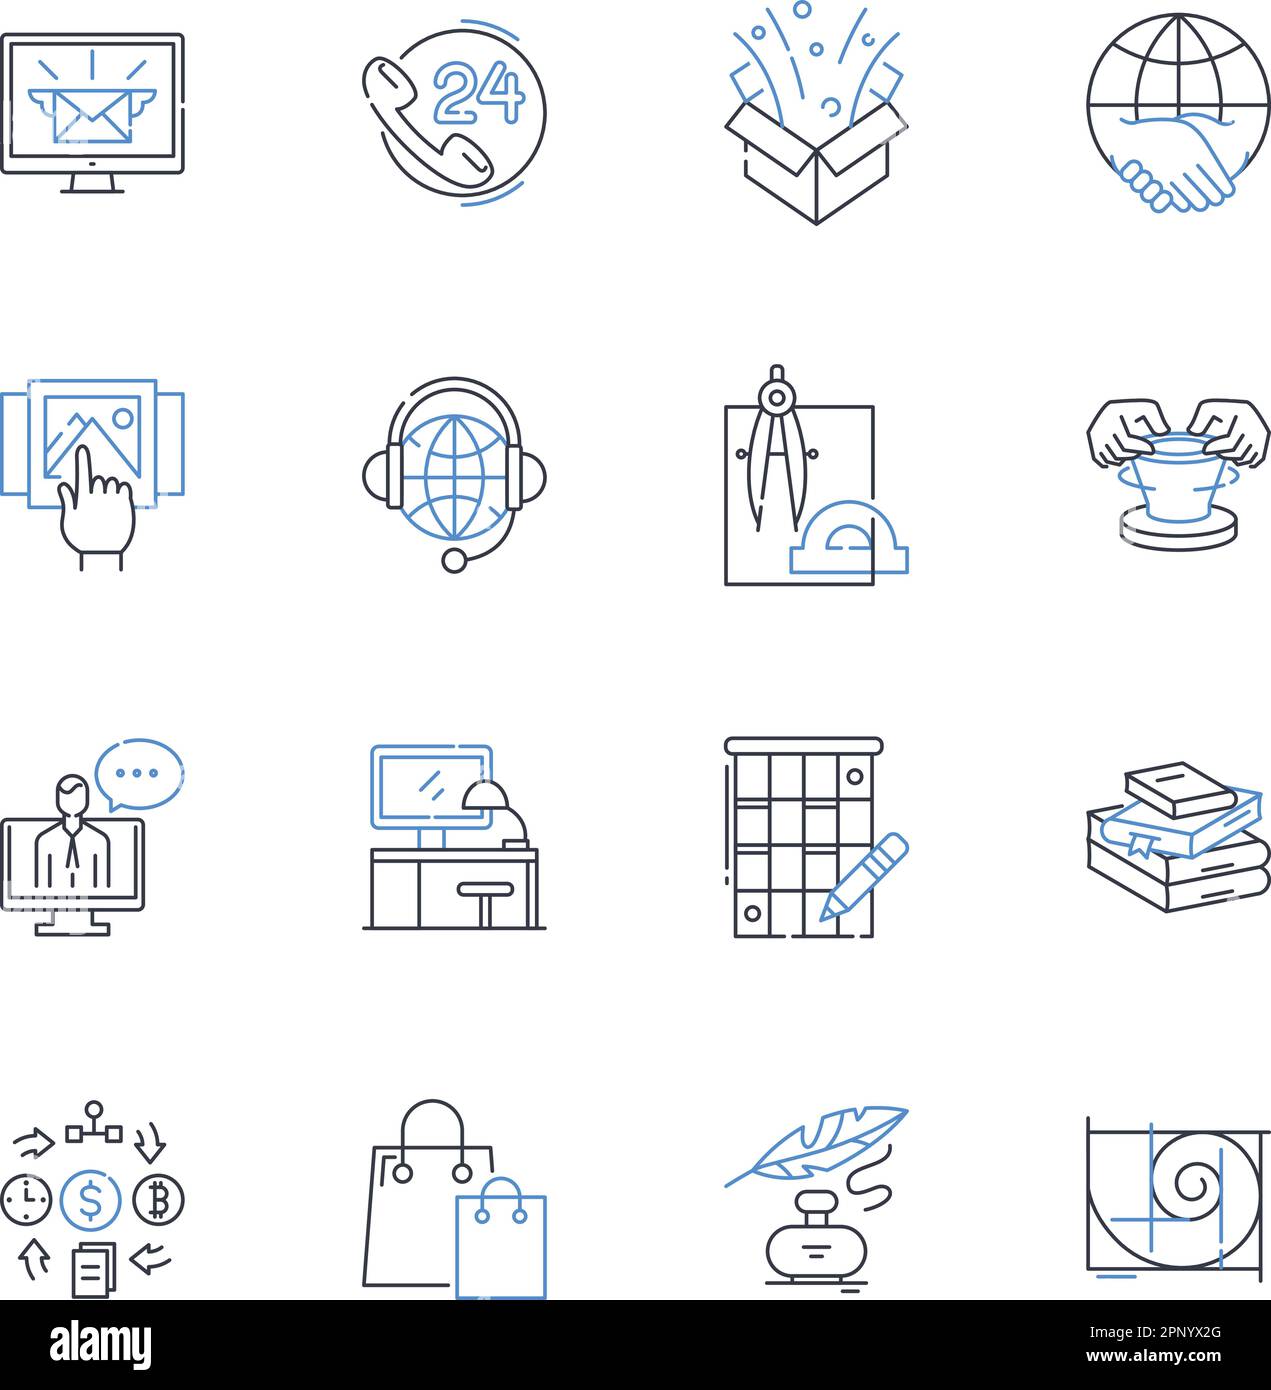 Personal enterprise line icons collection. Ambition, Entrepreneurship, Motivation, Resilience, Creativity, Determination, Independence vector and Stock Vector